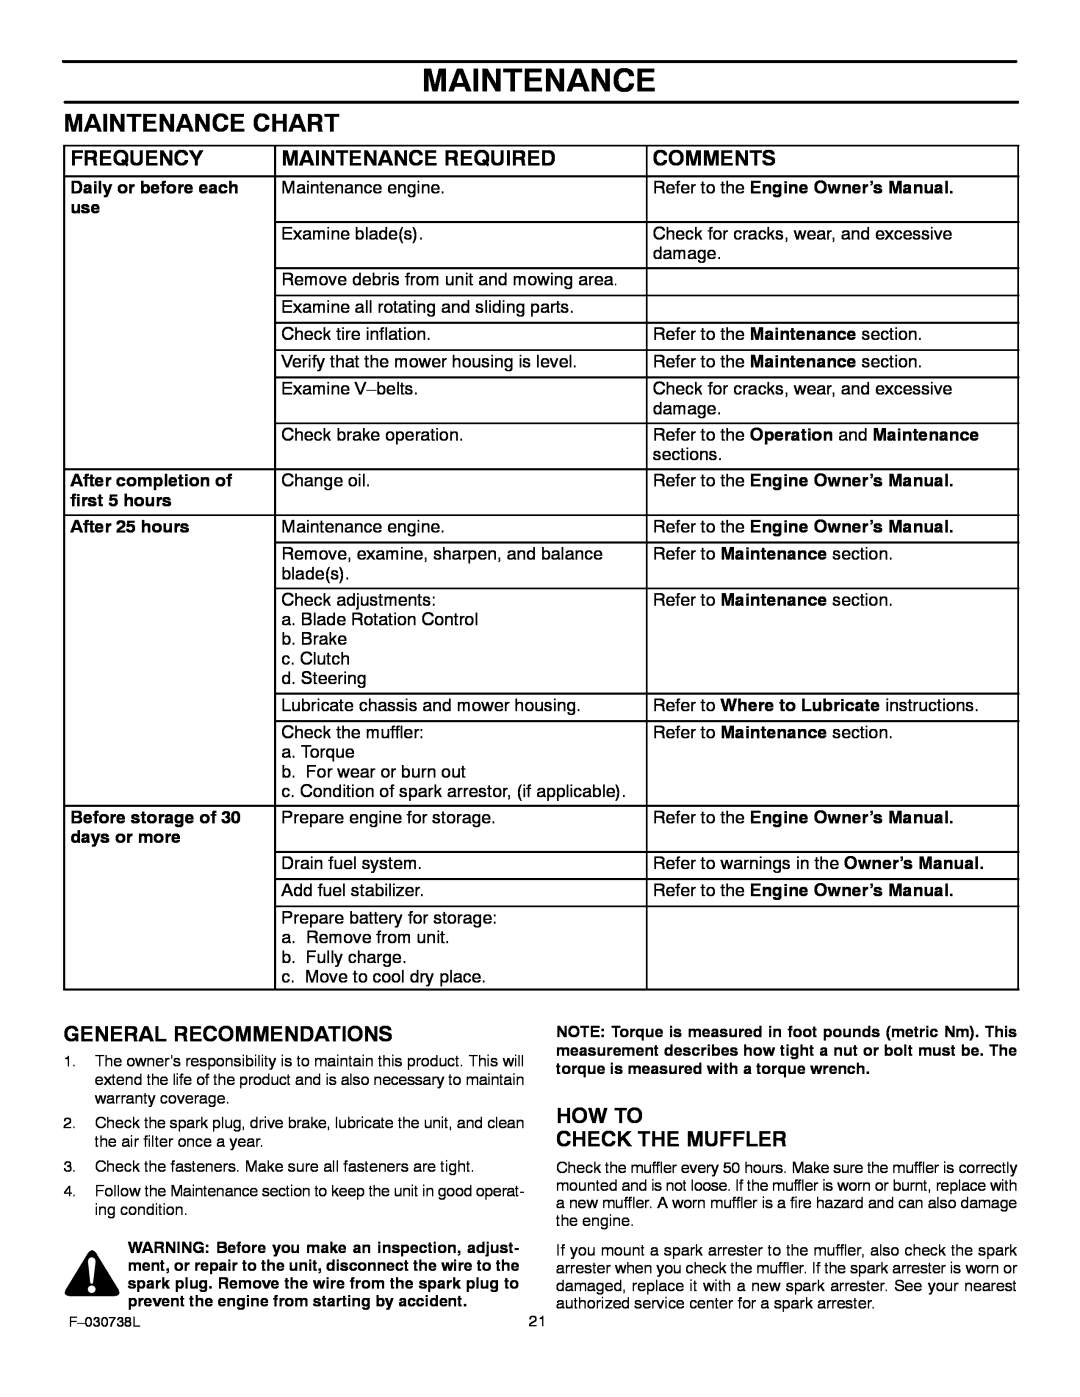 Murray 425603x99A manual Maintenance Chart, Frequency, Maintenance Required, Comments, General Recommendations 